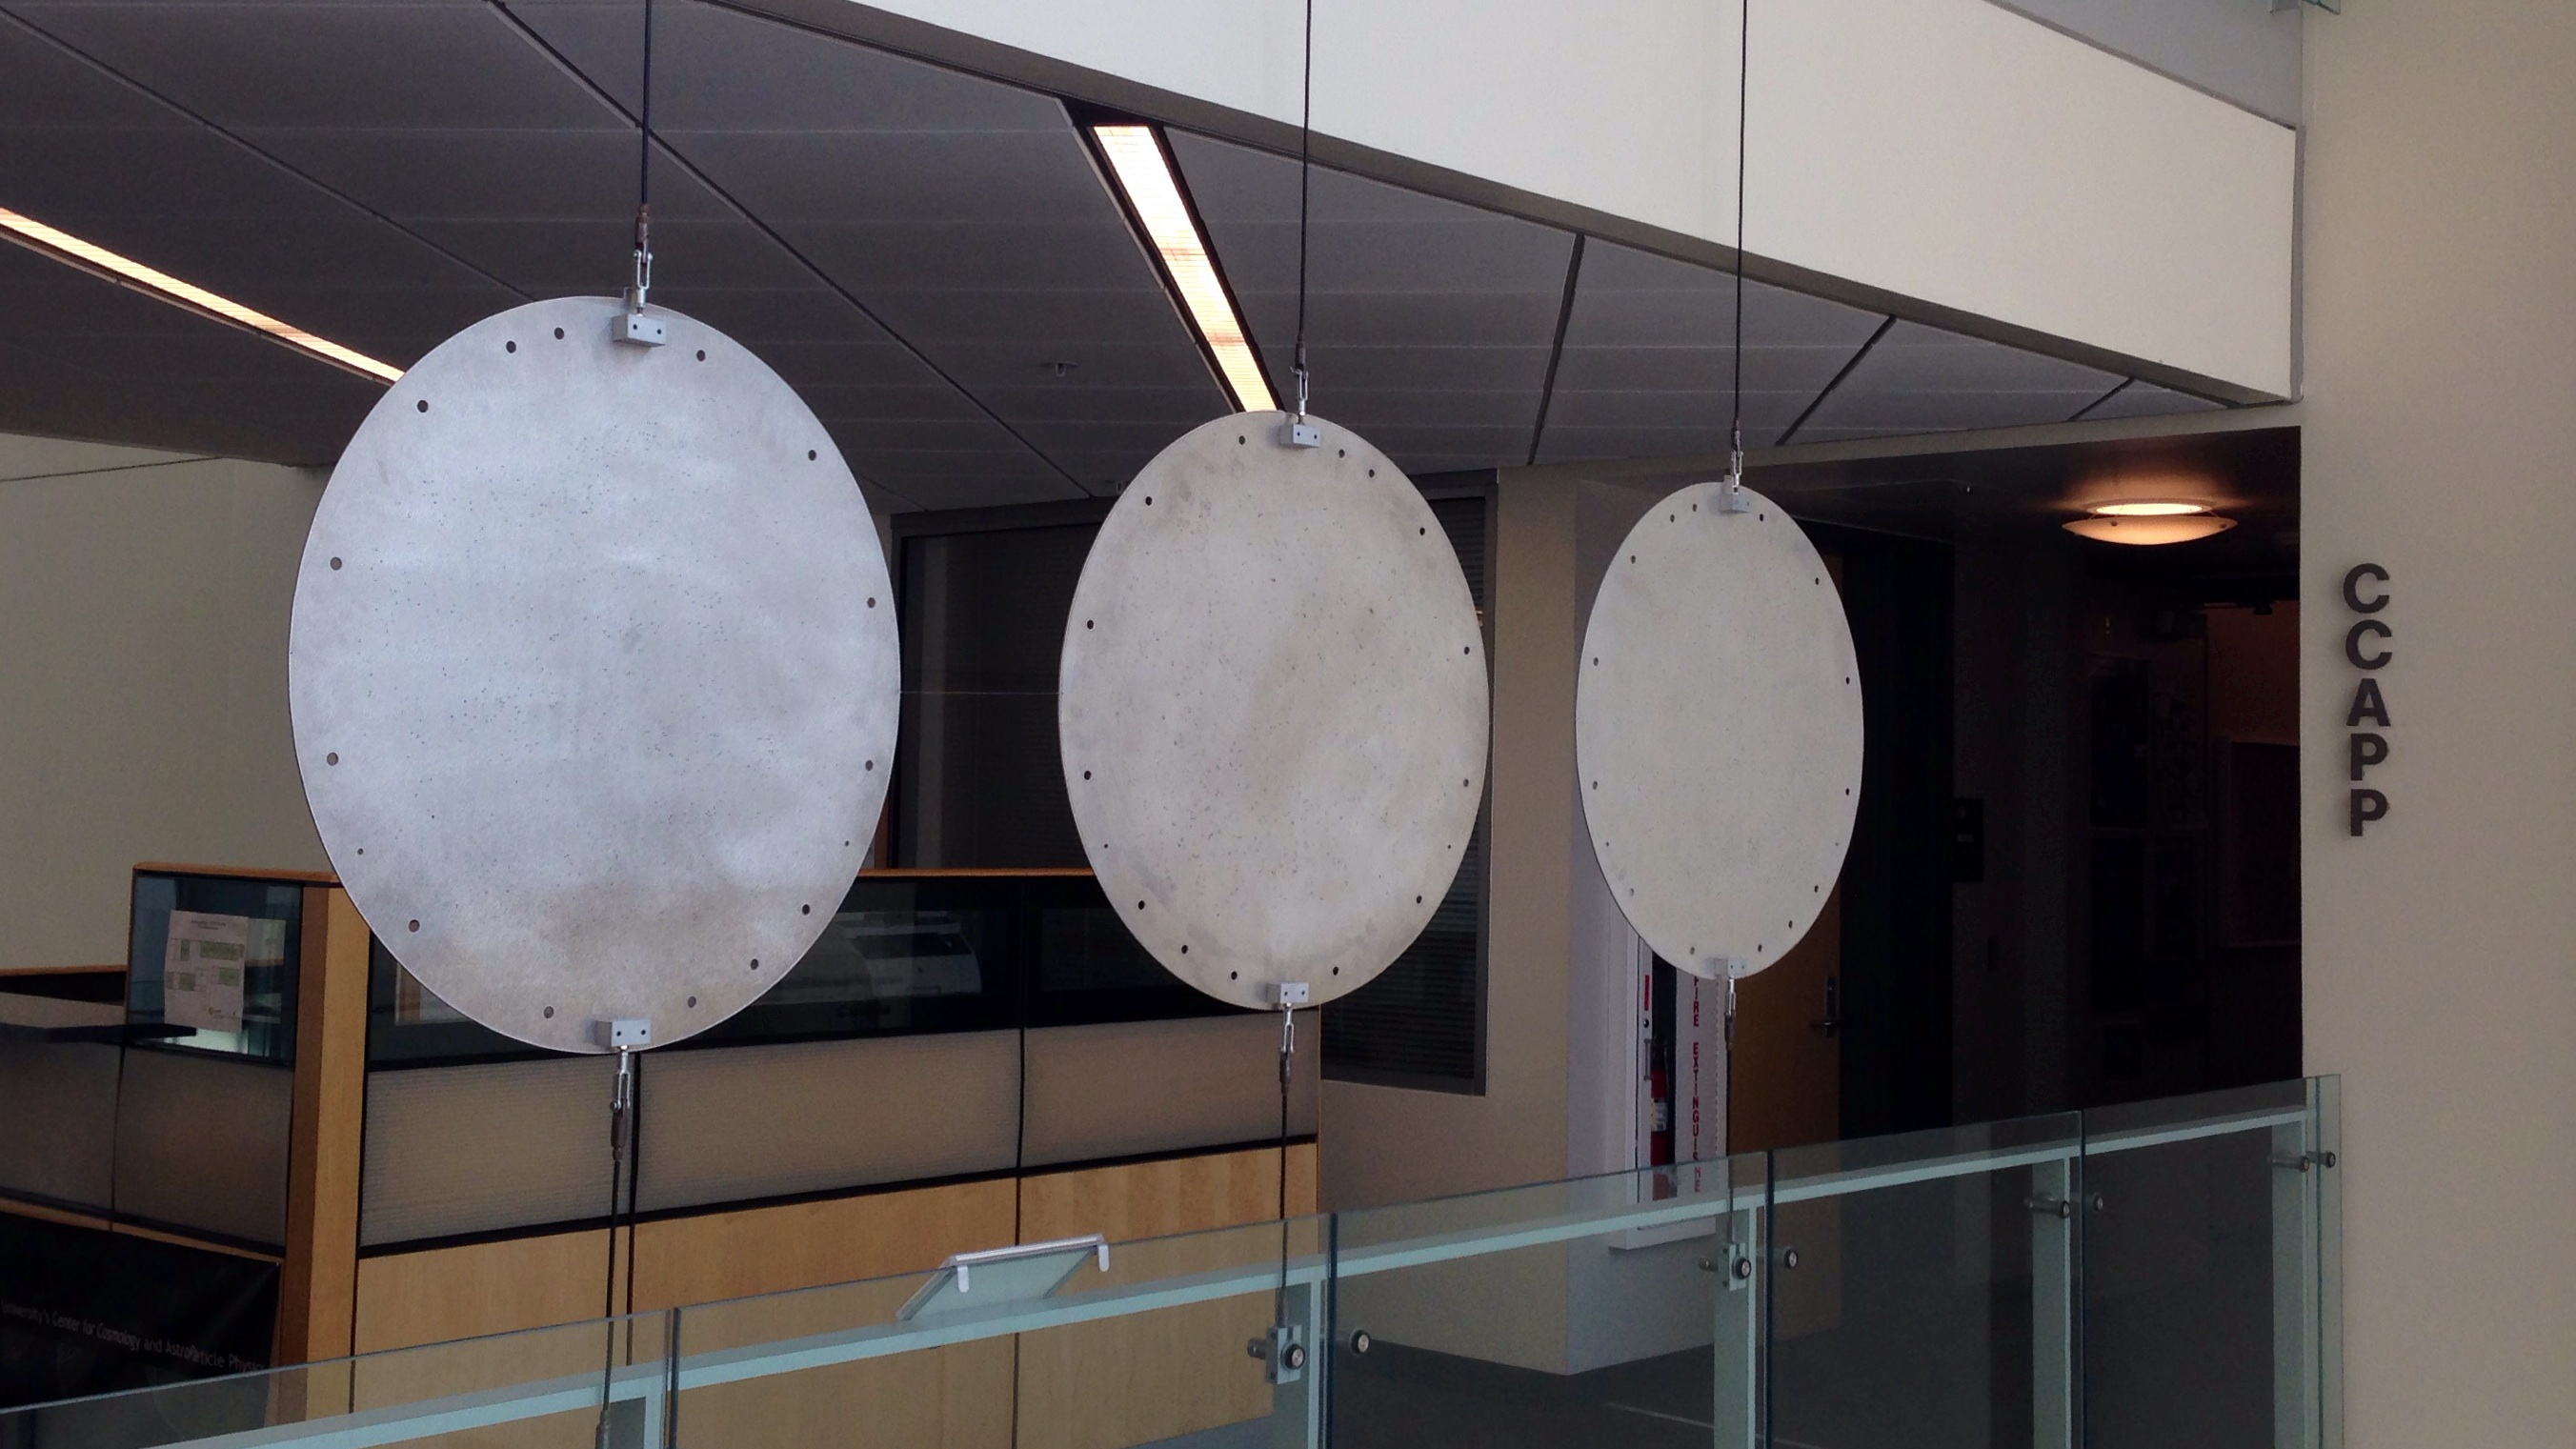 SDSS plates on display at CCAPP (Center for Cosmology and Astrophysics), Ohio State University. Image credit: Qingqing Mao. 